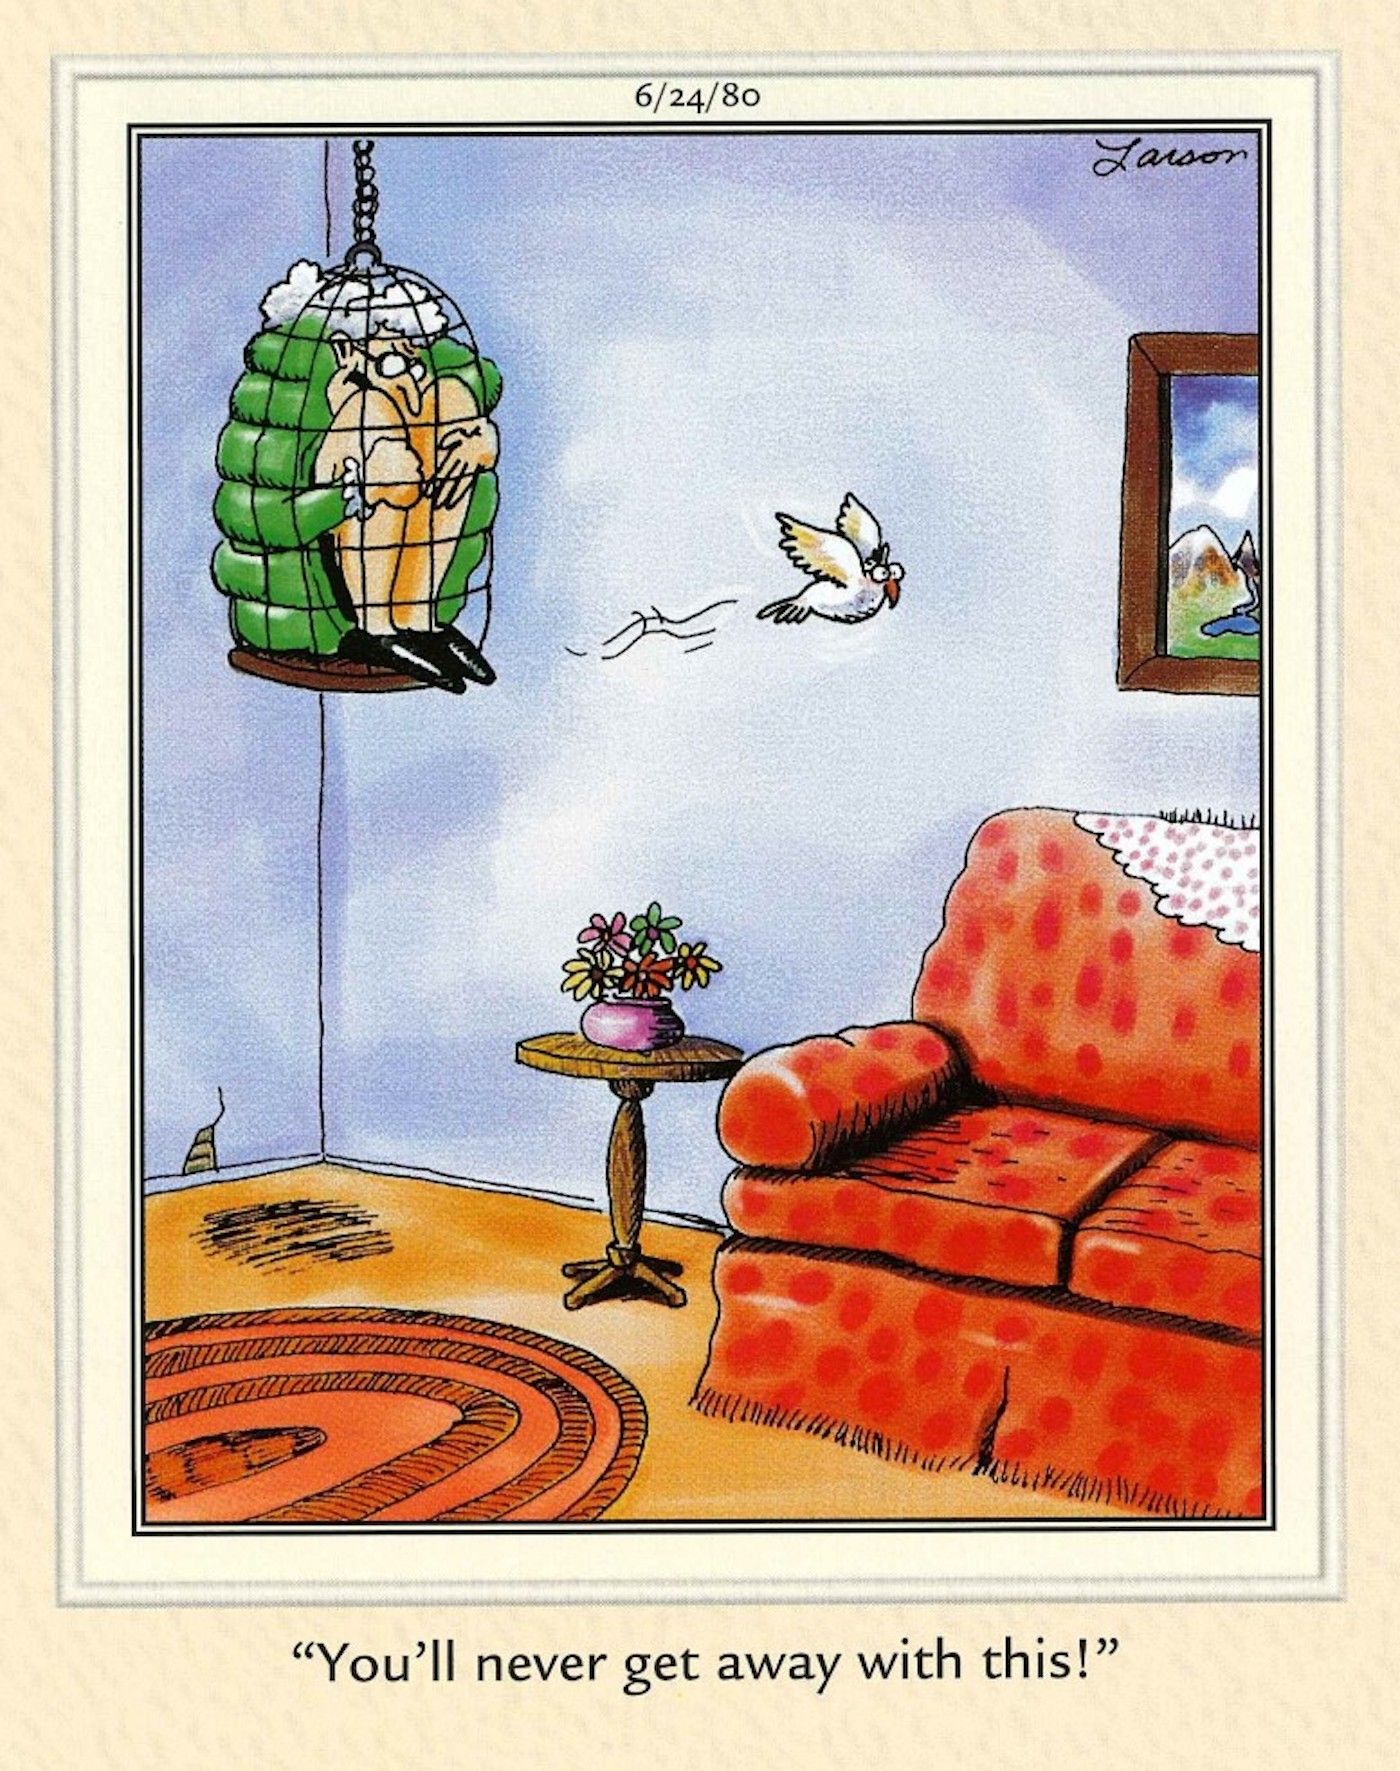 The Far Side bird escapes its cage